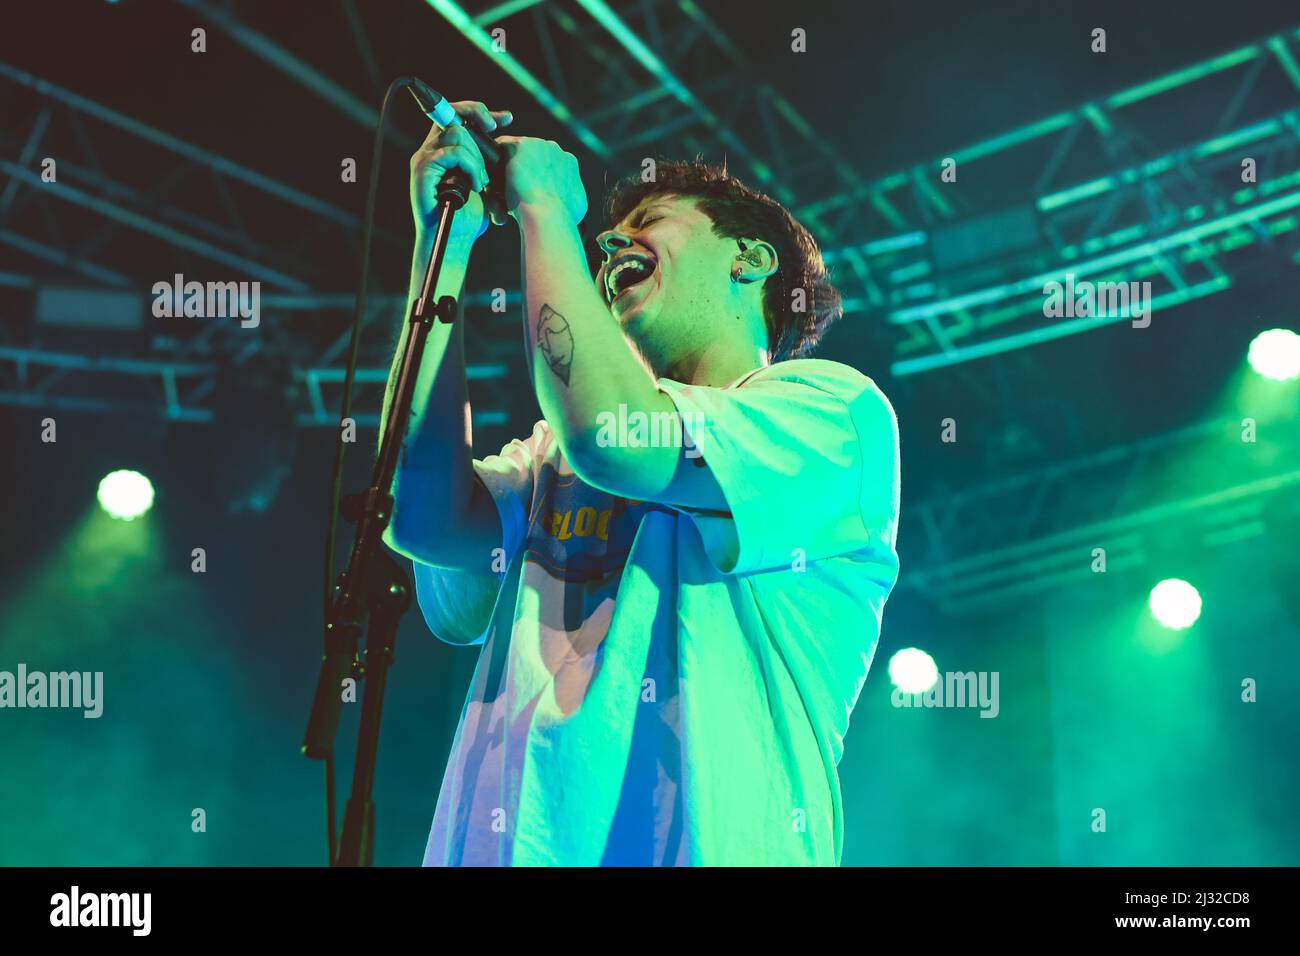 03/04/2022 - English rock band NOTHING BUT THIEVES playing their first live show after COVID, live at Fabrique Milano, Italy. Stock Photo